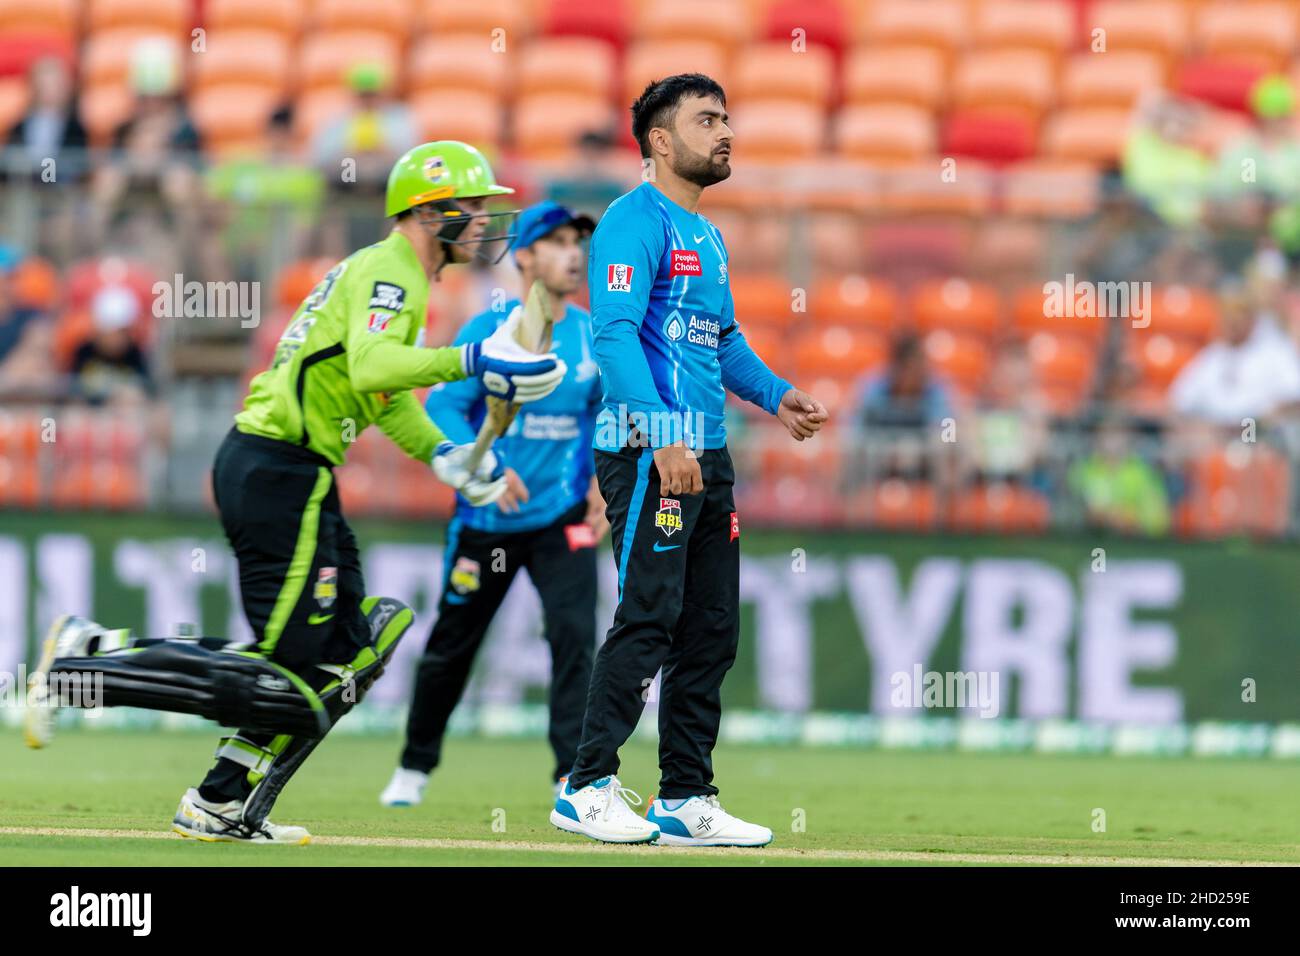 Sydney, Australia. 02nd Jan, 2022. Rashid Khan of Strikers reacts during the match between Sydney Thunder and Adelaide Strikers at Sydney Showground Stadium, on January 02, 2022, in Sydney, Australia. (Editorial use only) Credit: Izhar Ahmed Khan/Alamy Live News/Alamy Live News Stock Photo